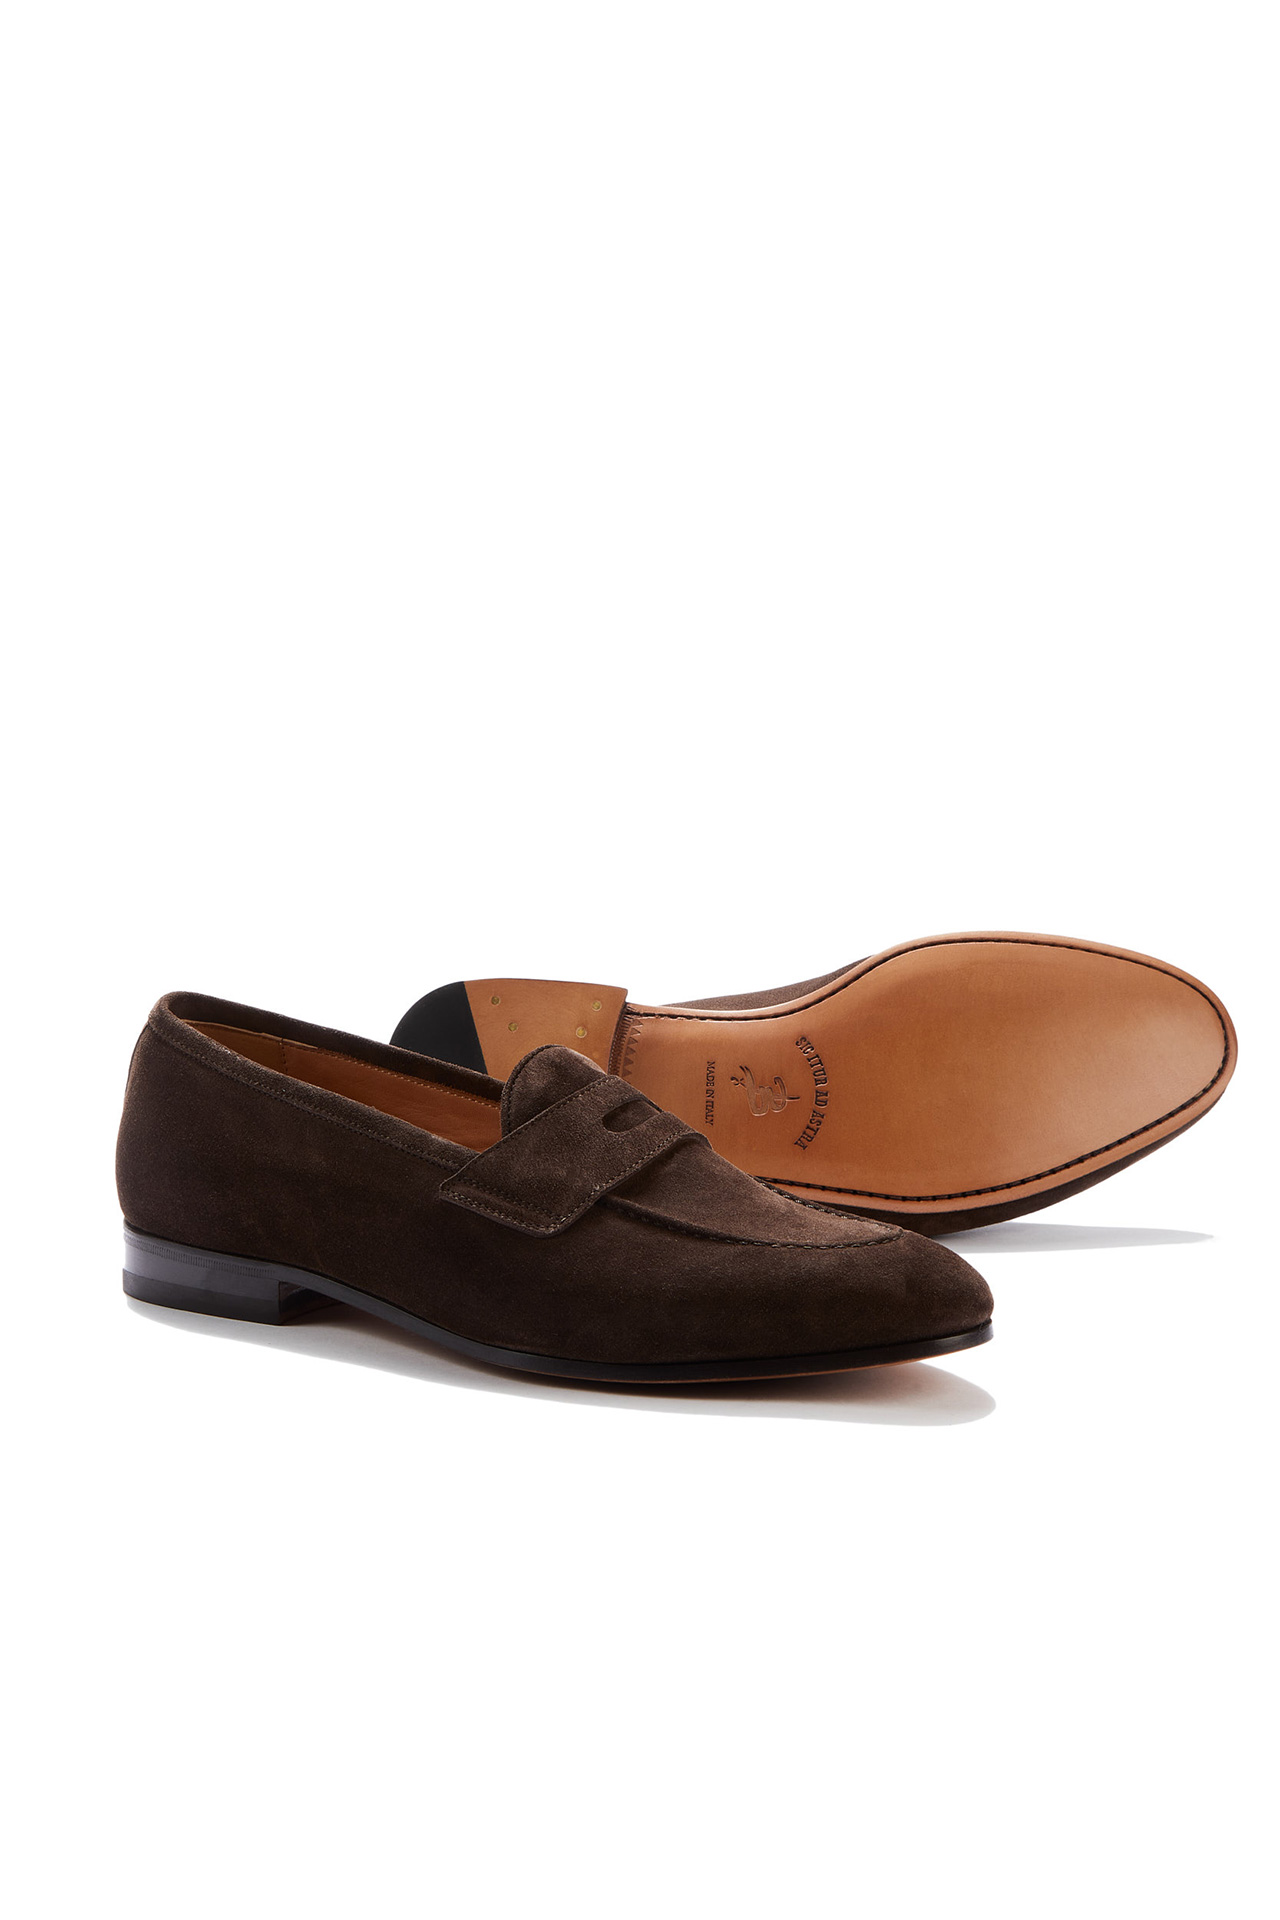 Polar Hollow laser Lawrence Dark Brown Suede Penny Loafers - Barbanera